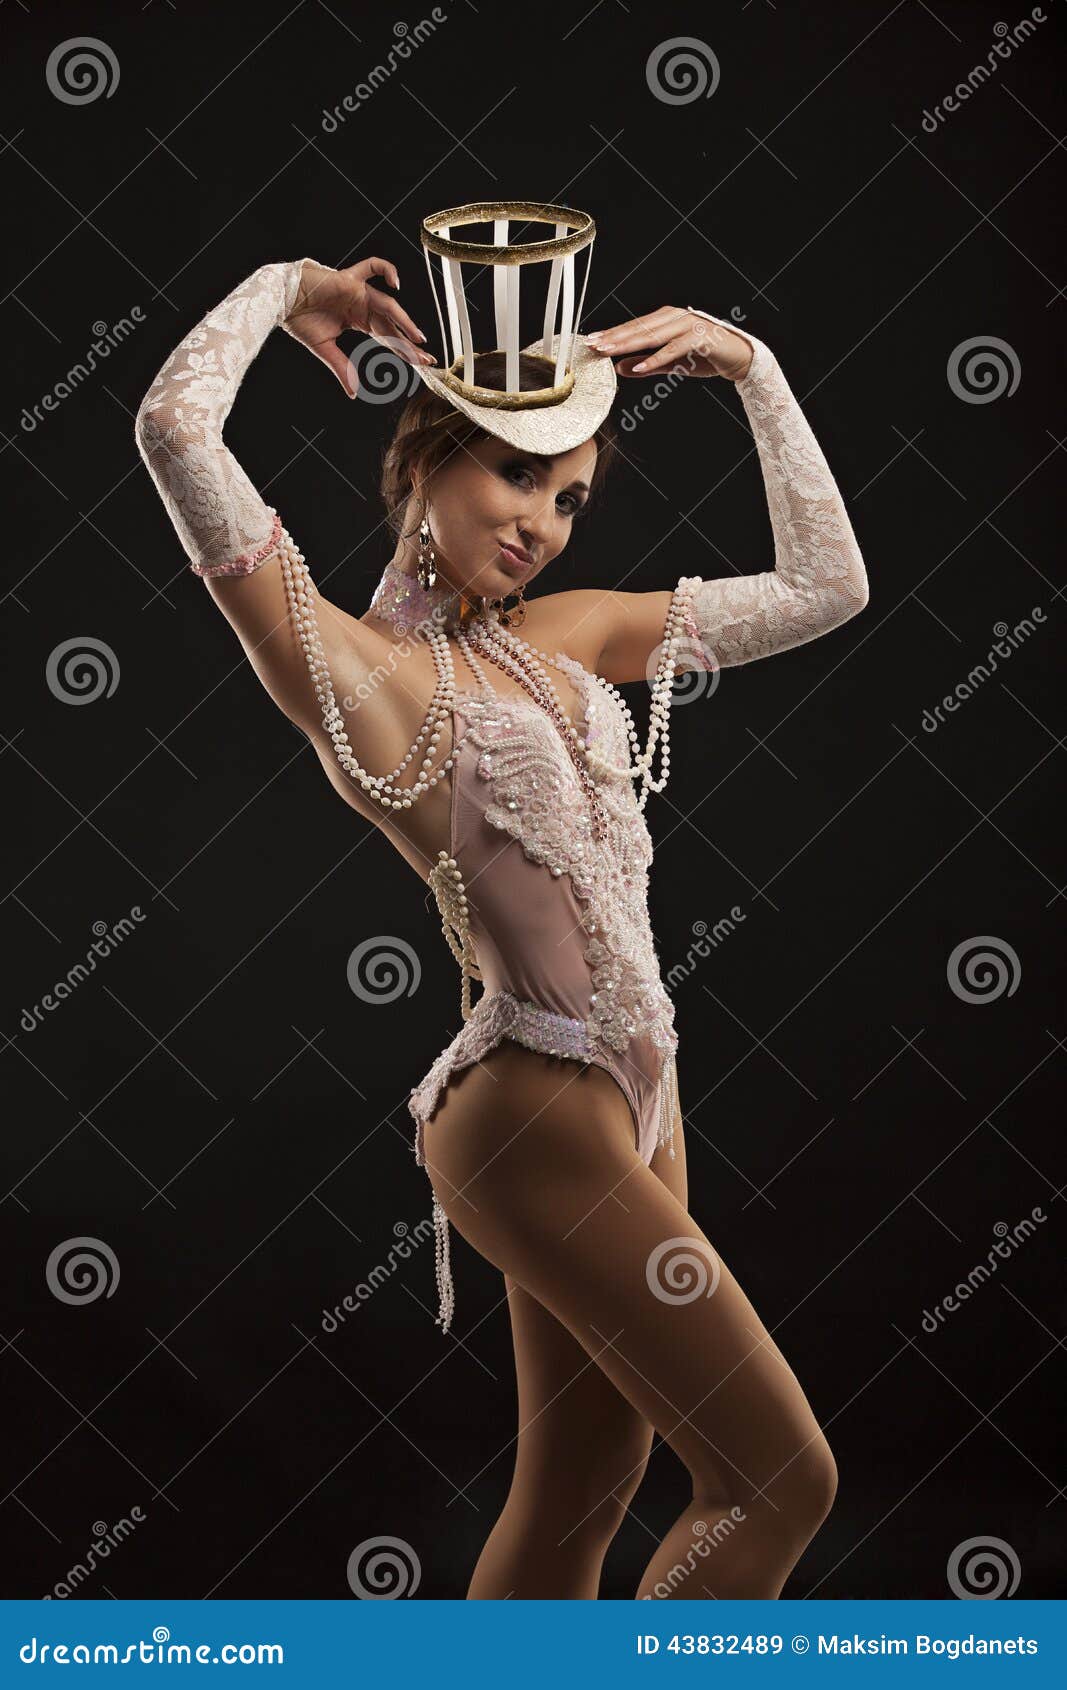 burlesque dancer in white dress with hat